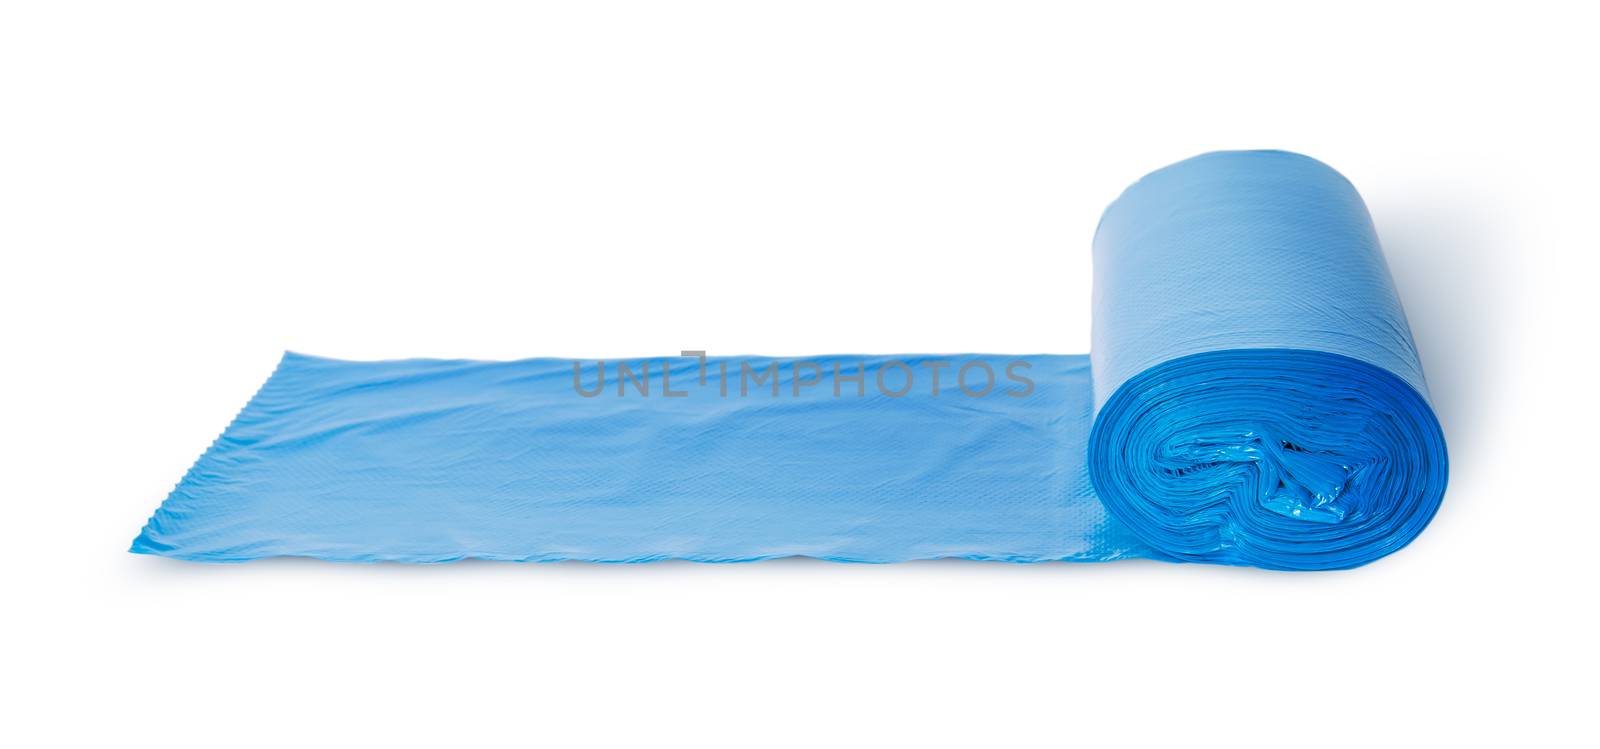 Roll of blue plastic garbage bags in front view isolated on white background